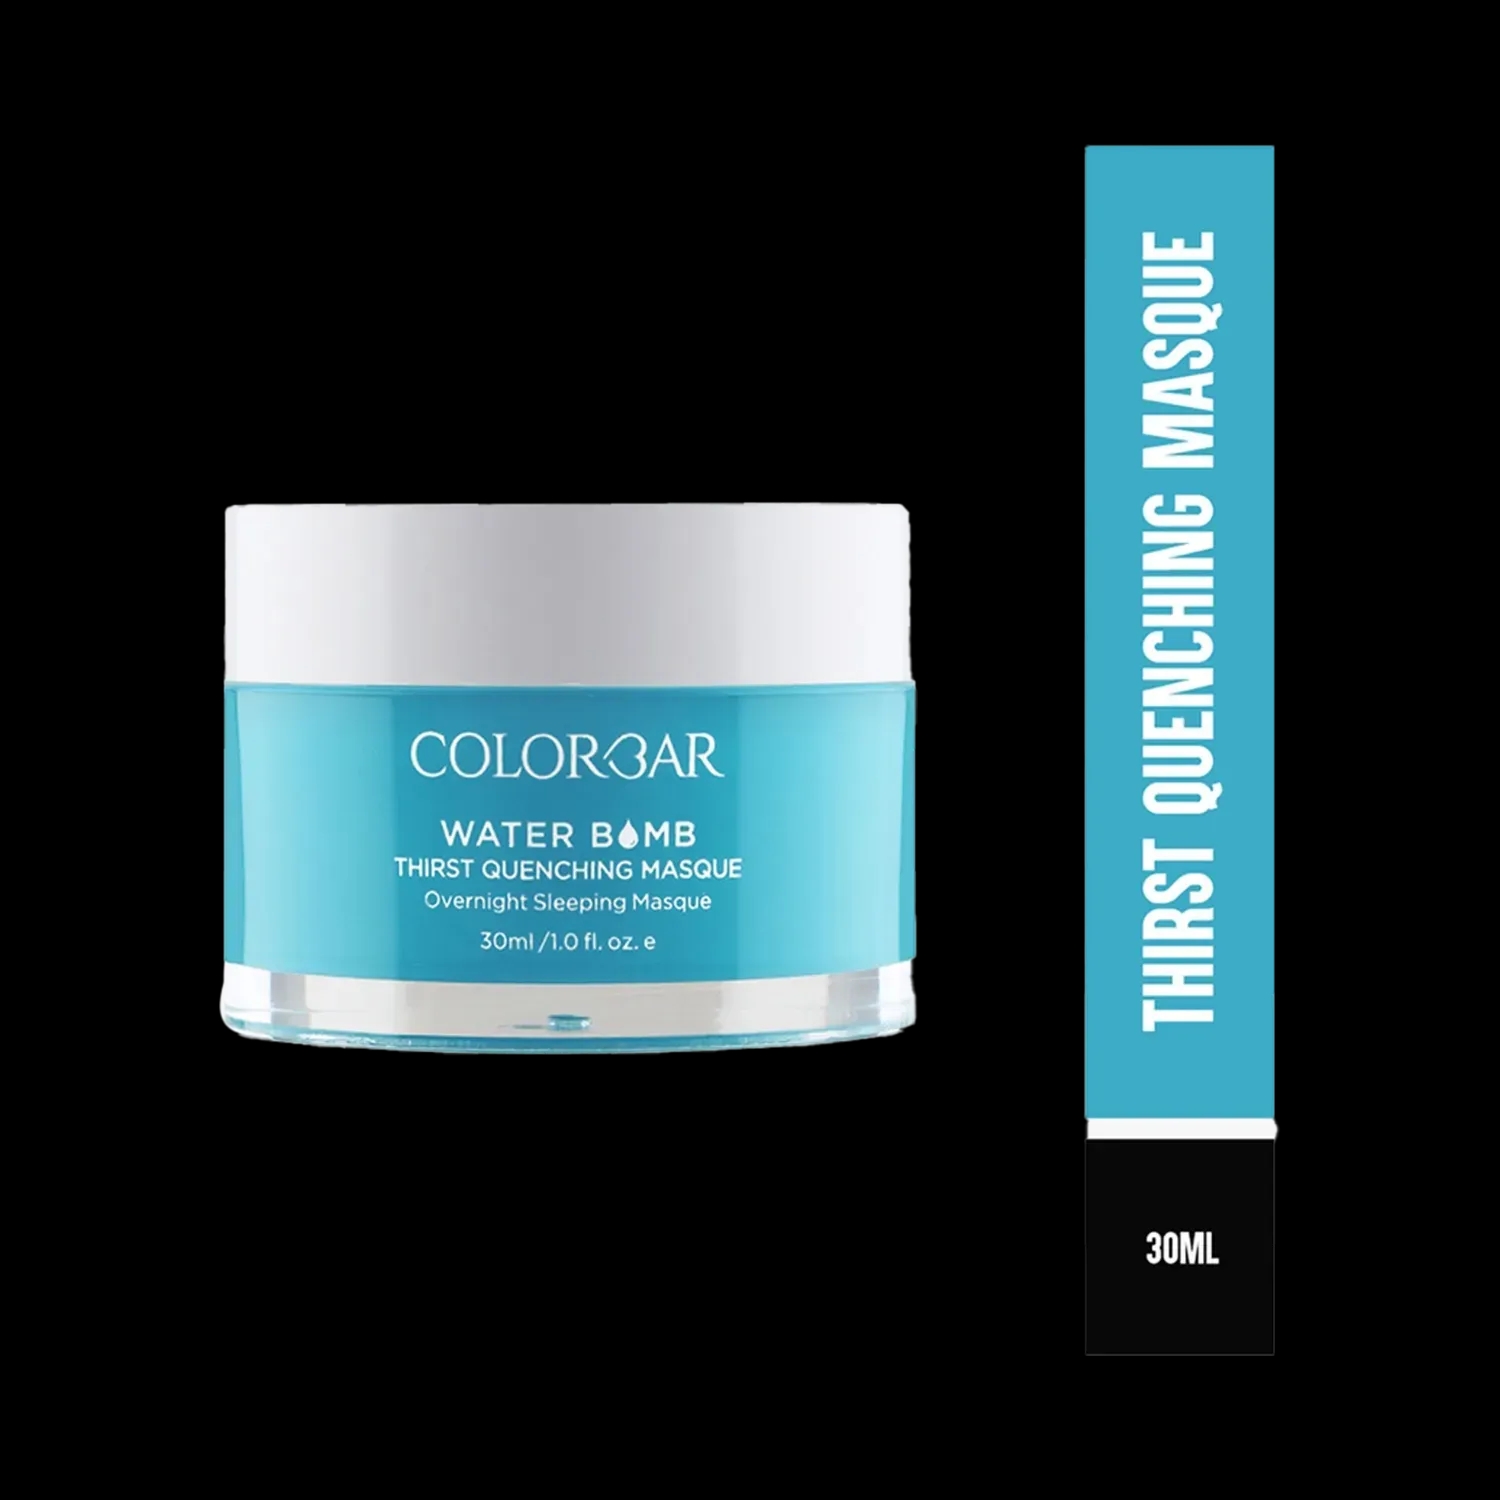 Colorbar | Colorbar Water Bomb Thirst Quenching Masque (30ml)